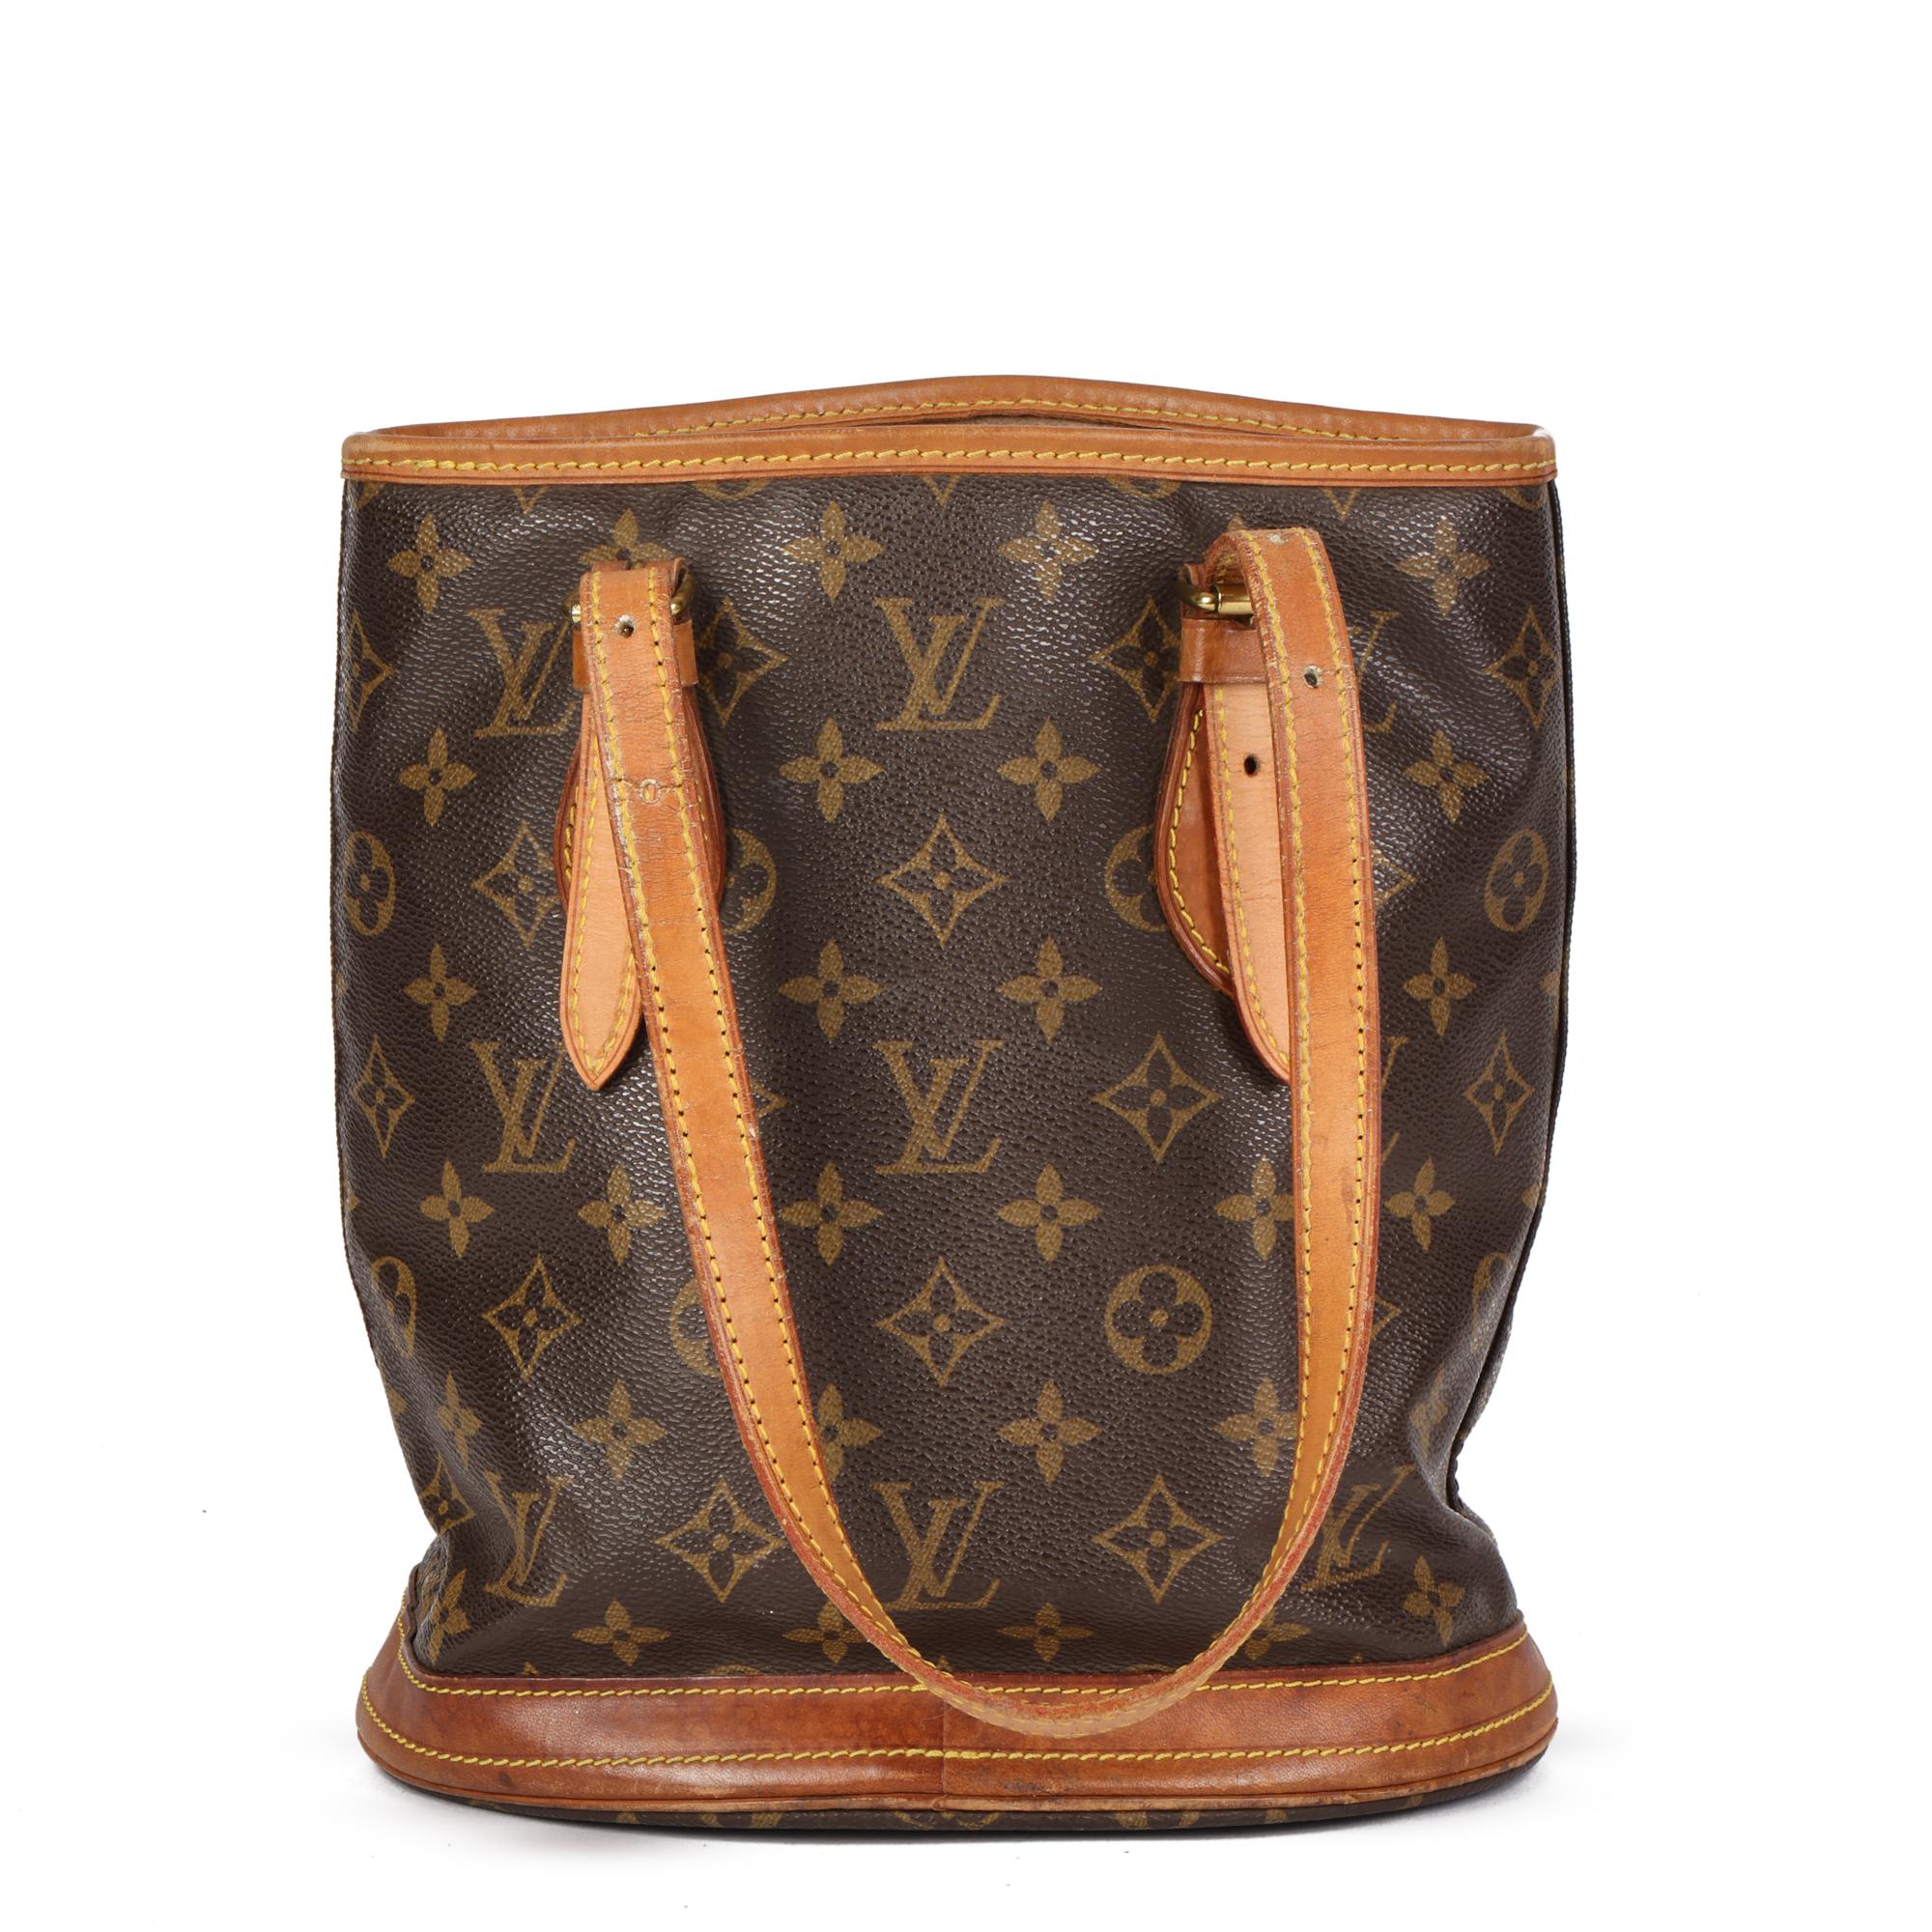 Women's LOUIS VUITTON Brown Monogram Coated Canvas & Leather Bucket Bag PM with Pouch